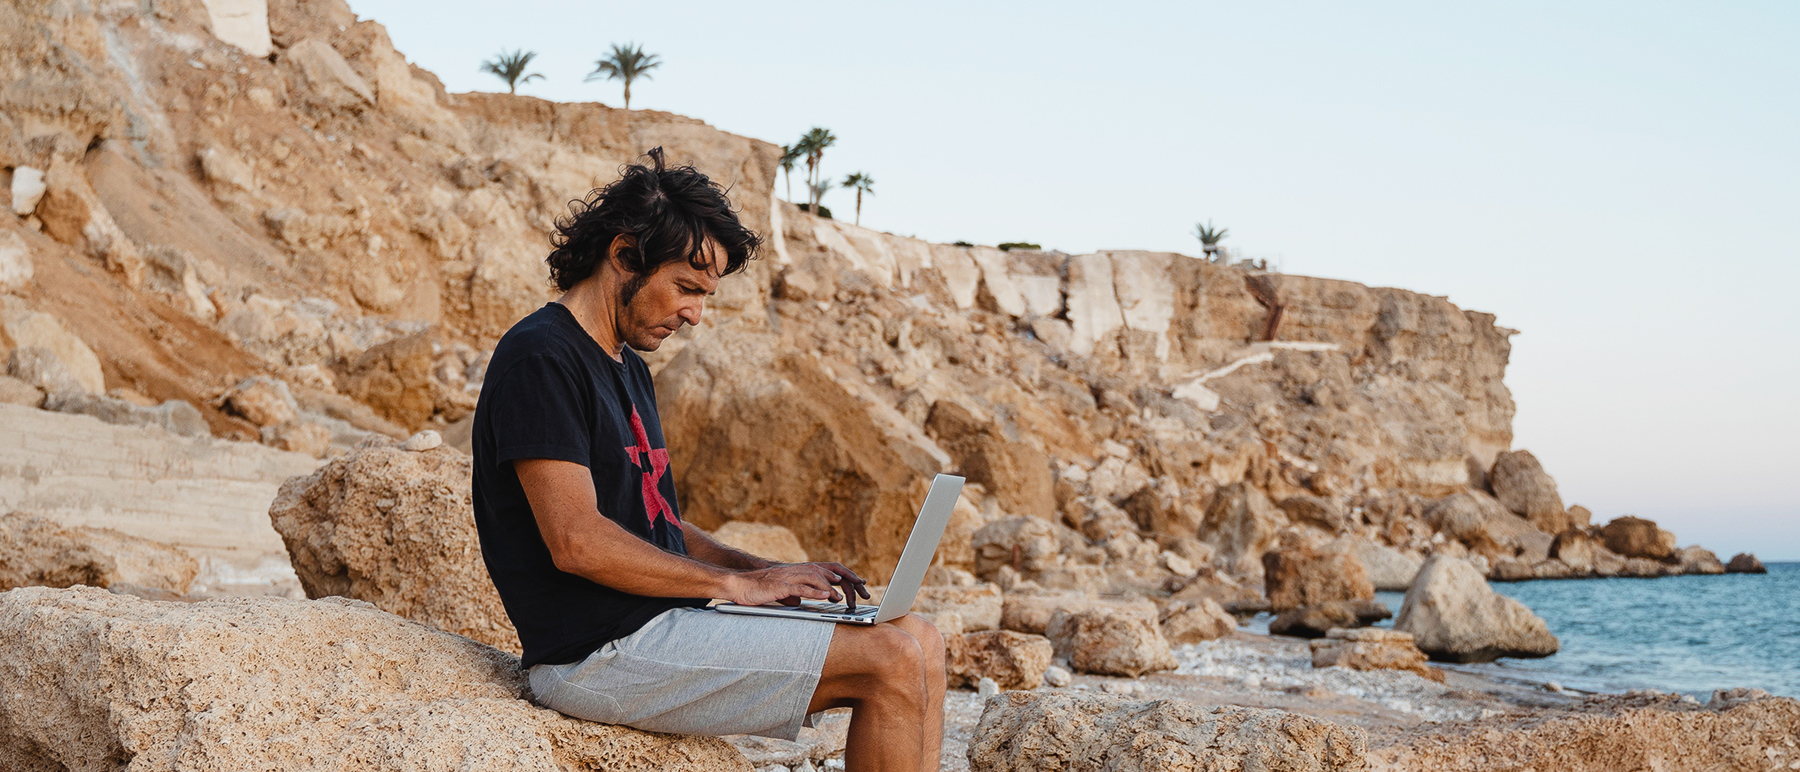 Man sitting on rock at the beach while using a laptop